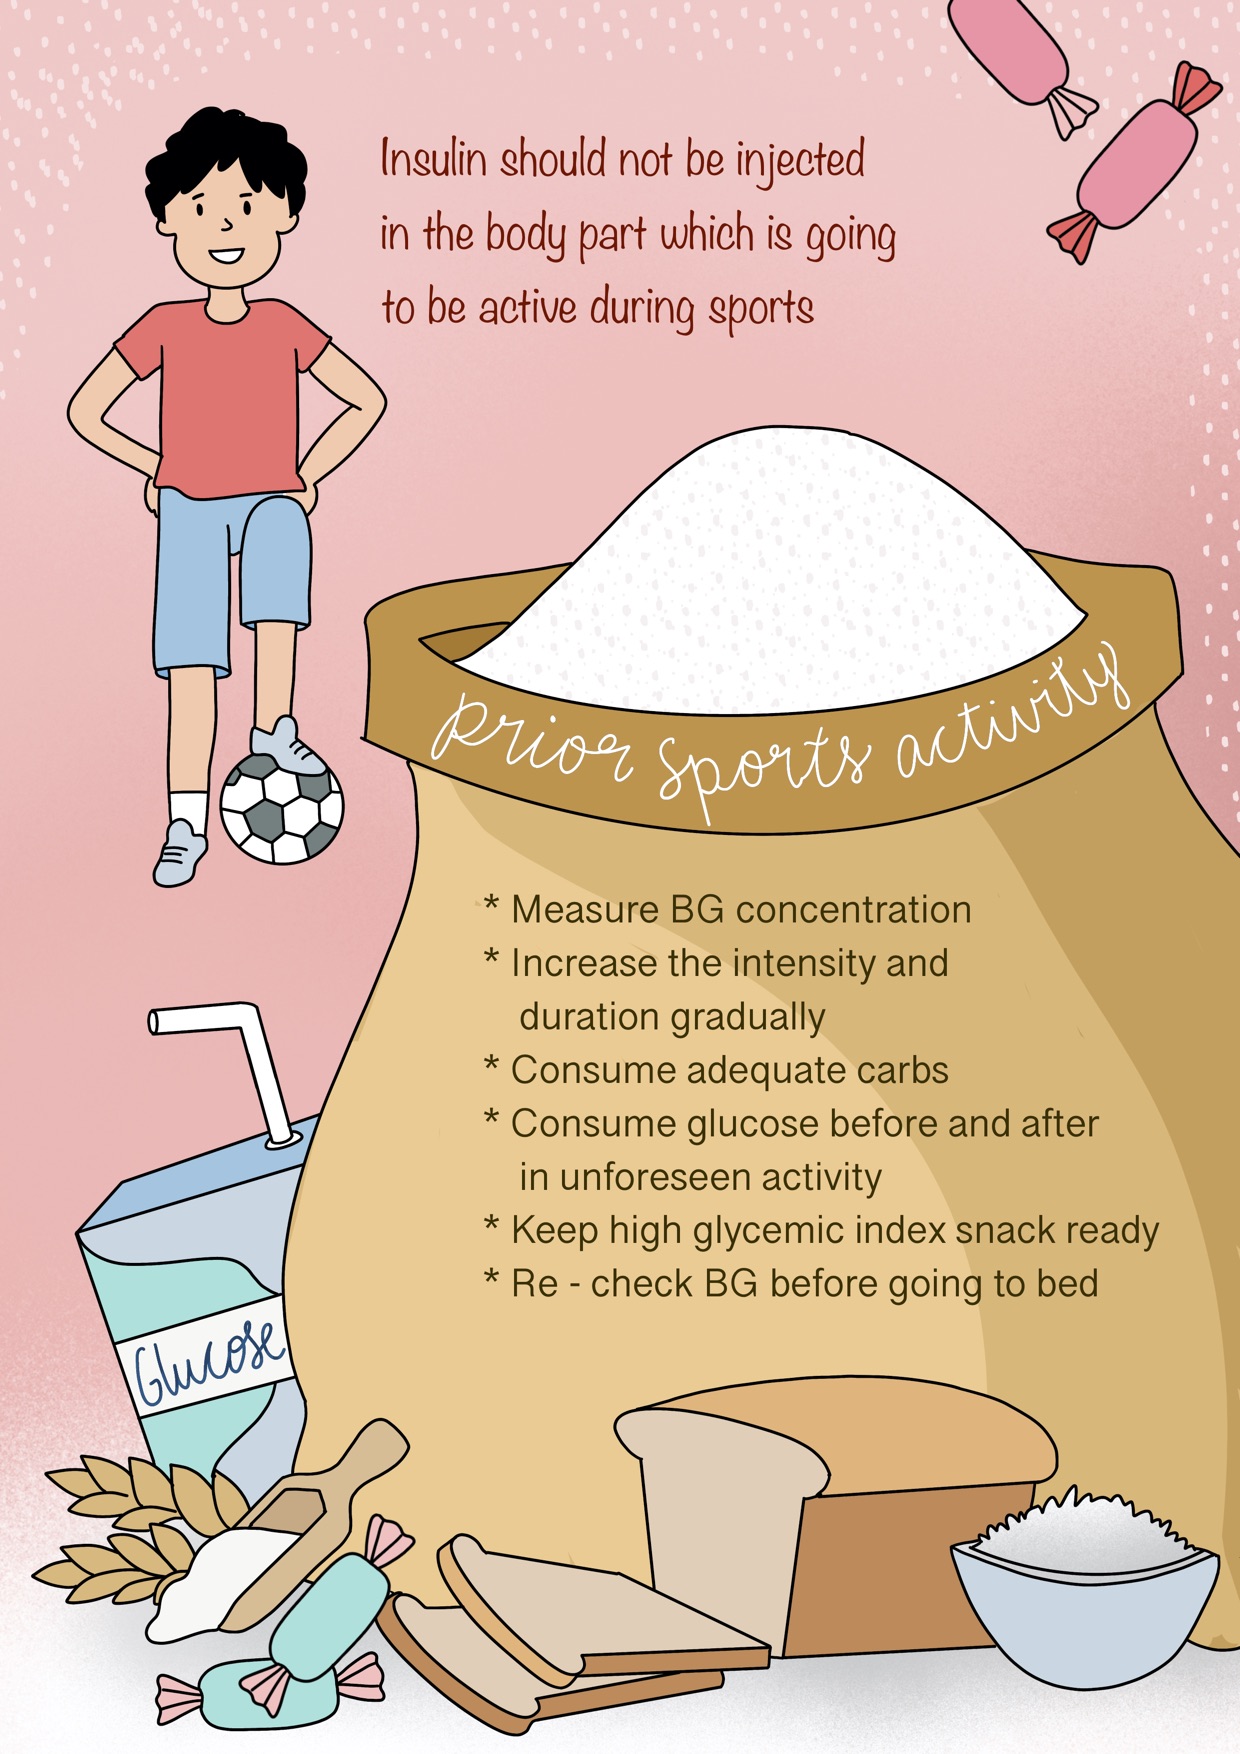 what type 1 diabetes kids children should do prior to sports